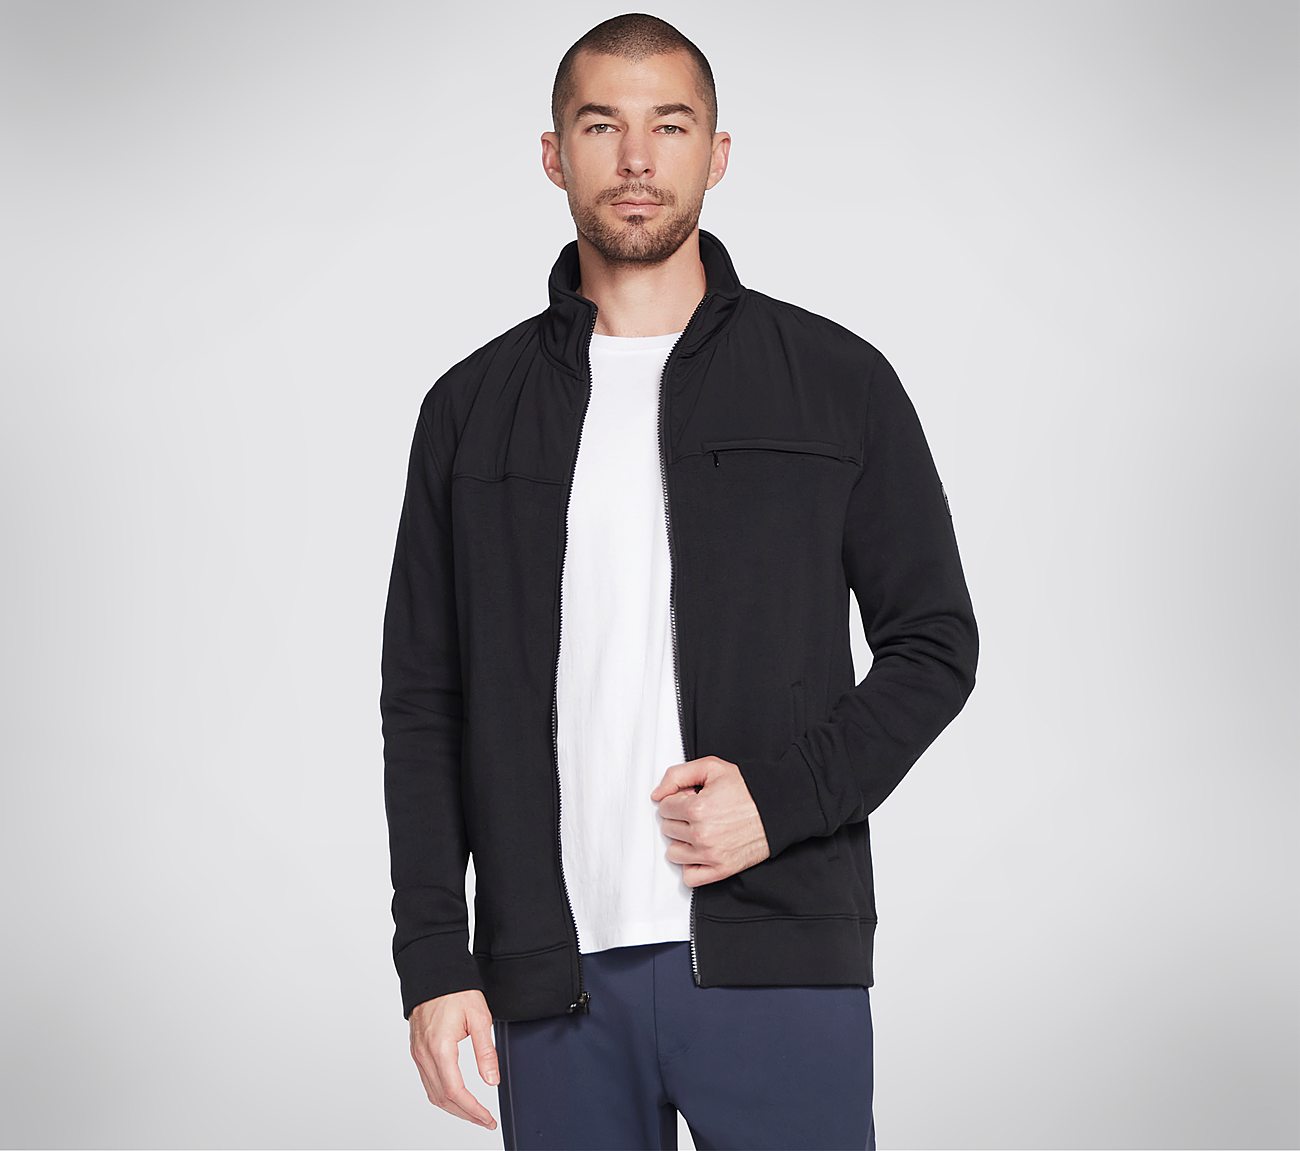 SKECH-SWEATS UTILITY JACKET, BBBBLACK Apparel Lateral View